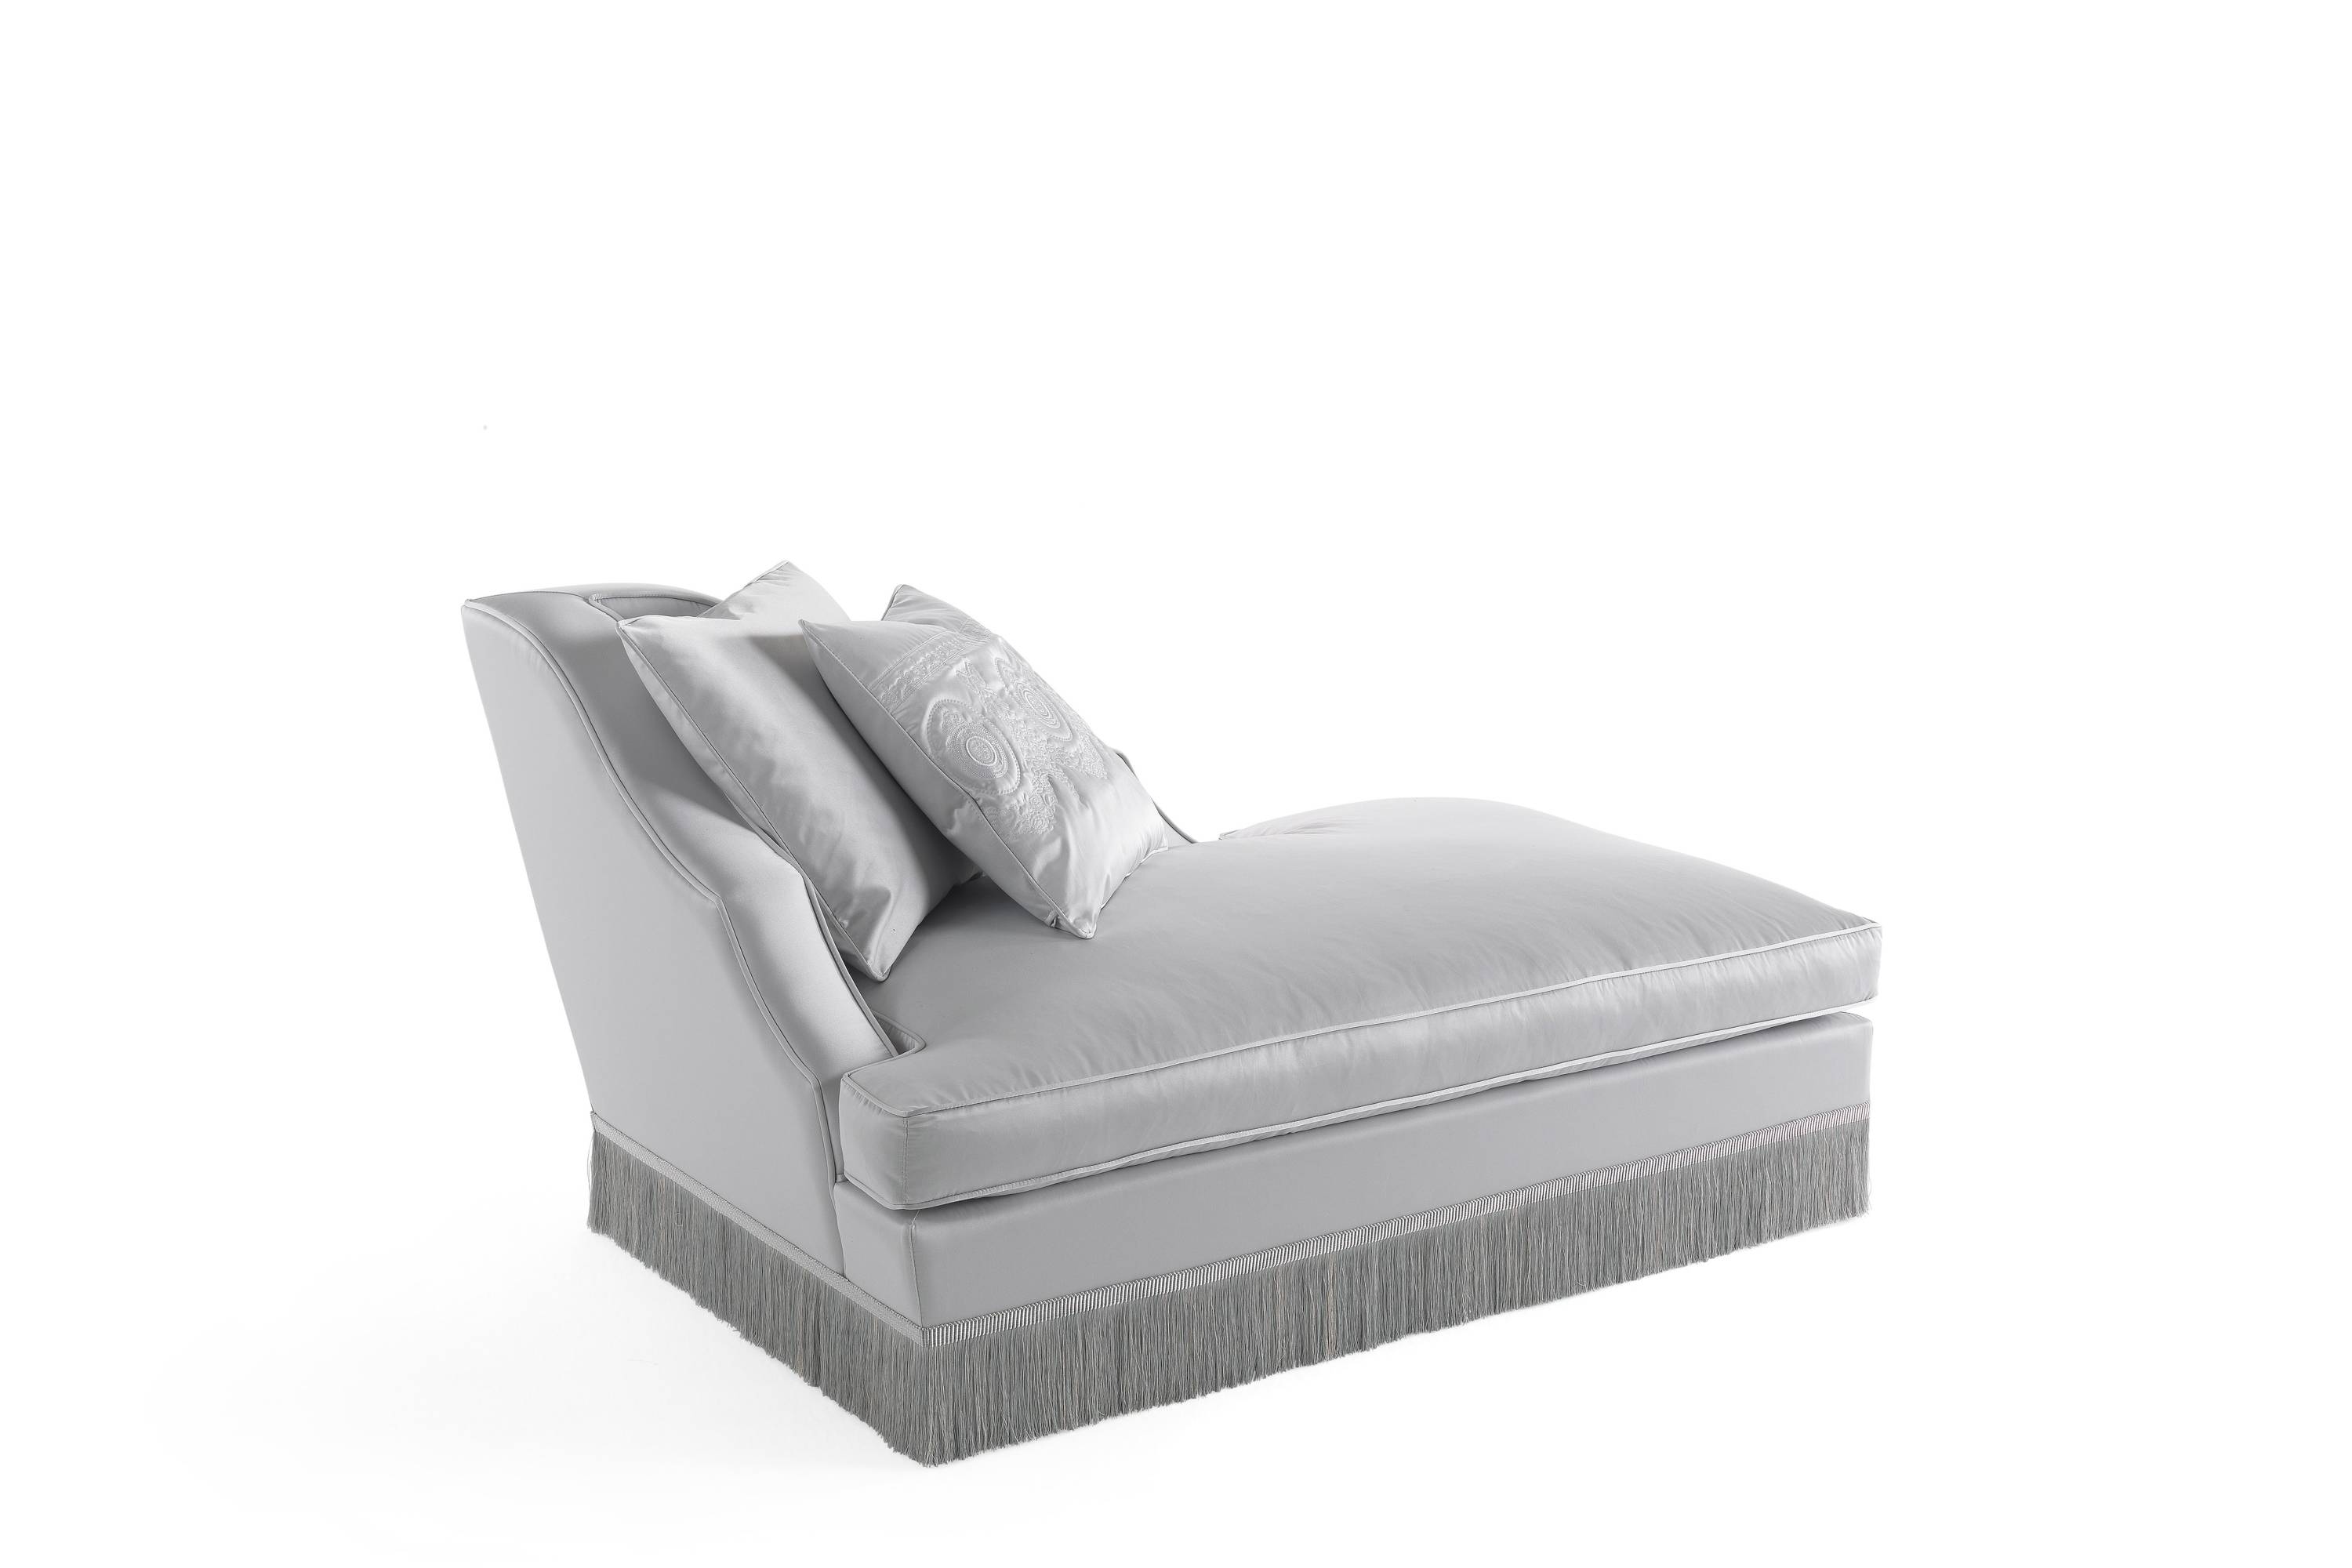 WHEIDON chaise longue - quality furniture and timeless elegance with luxury Made in Italy classic chaise longues and dormeuses of Oro Bianco collection.